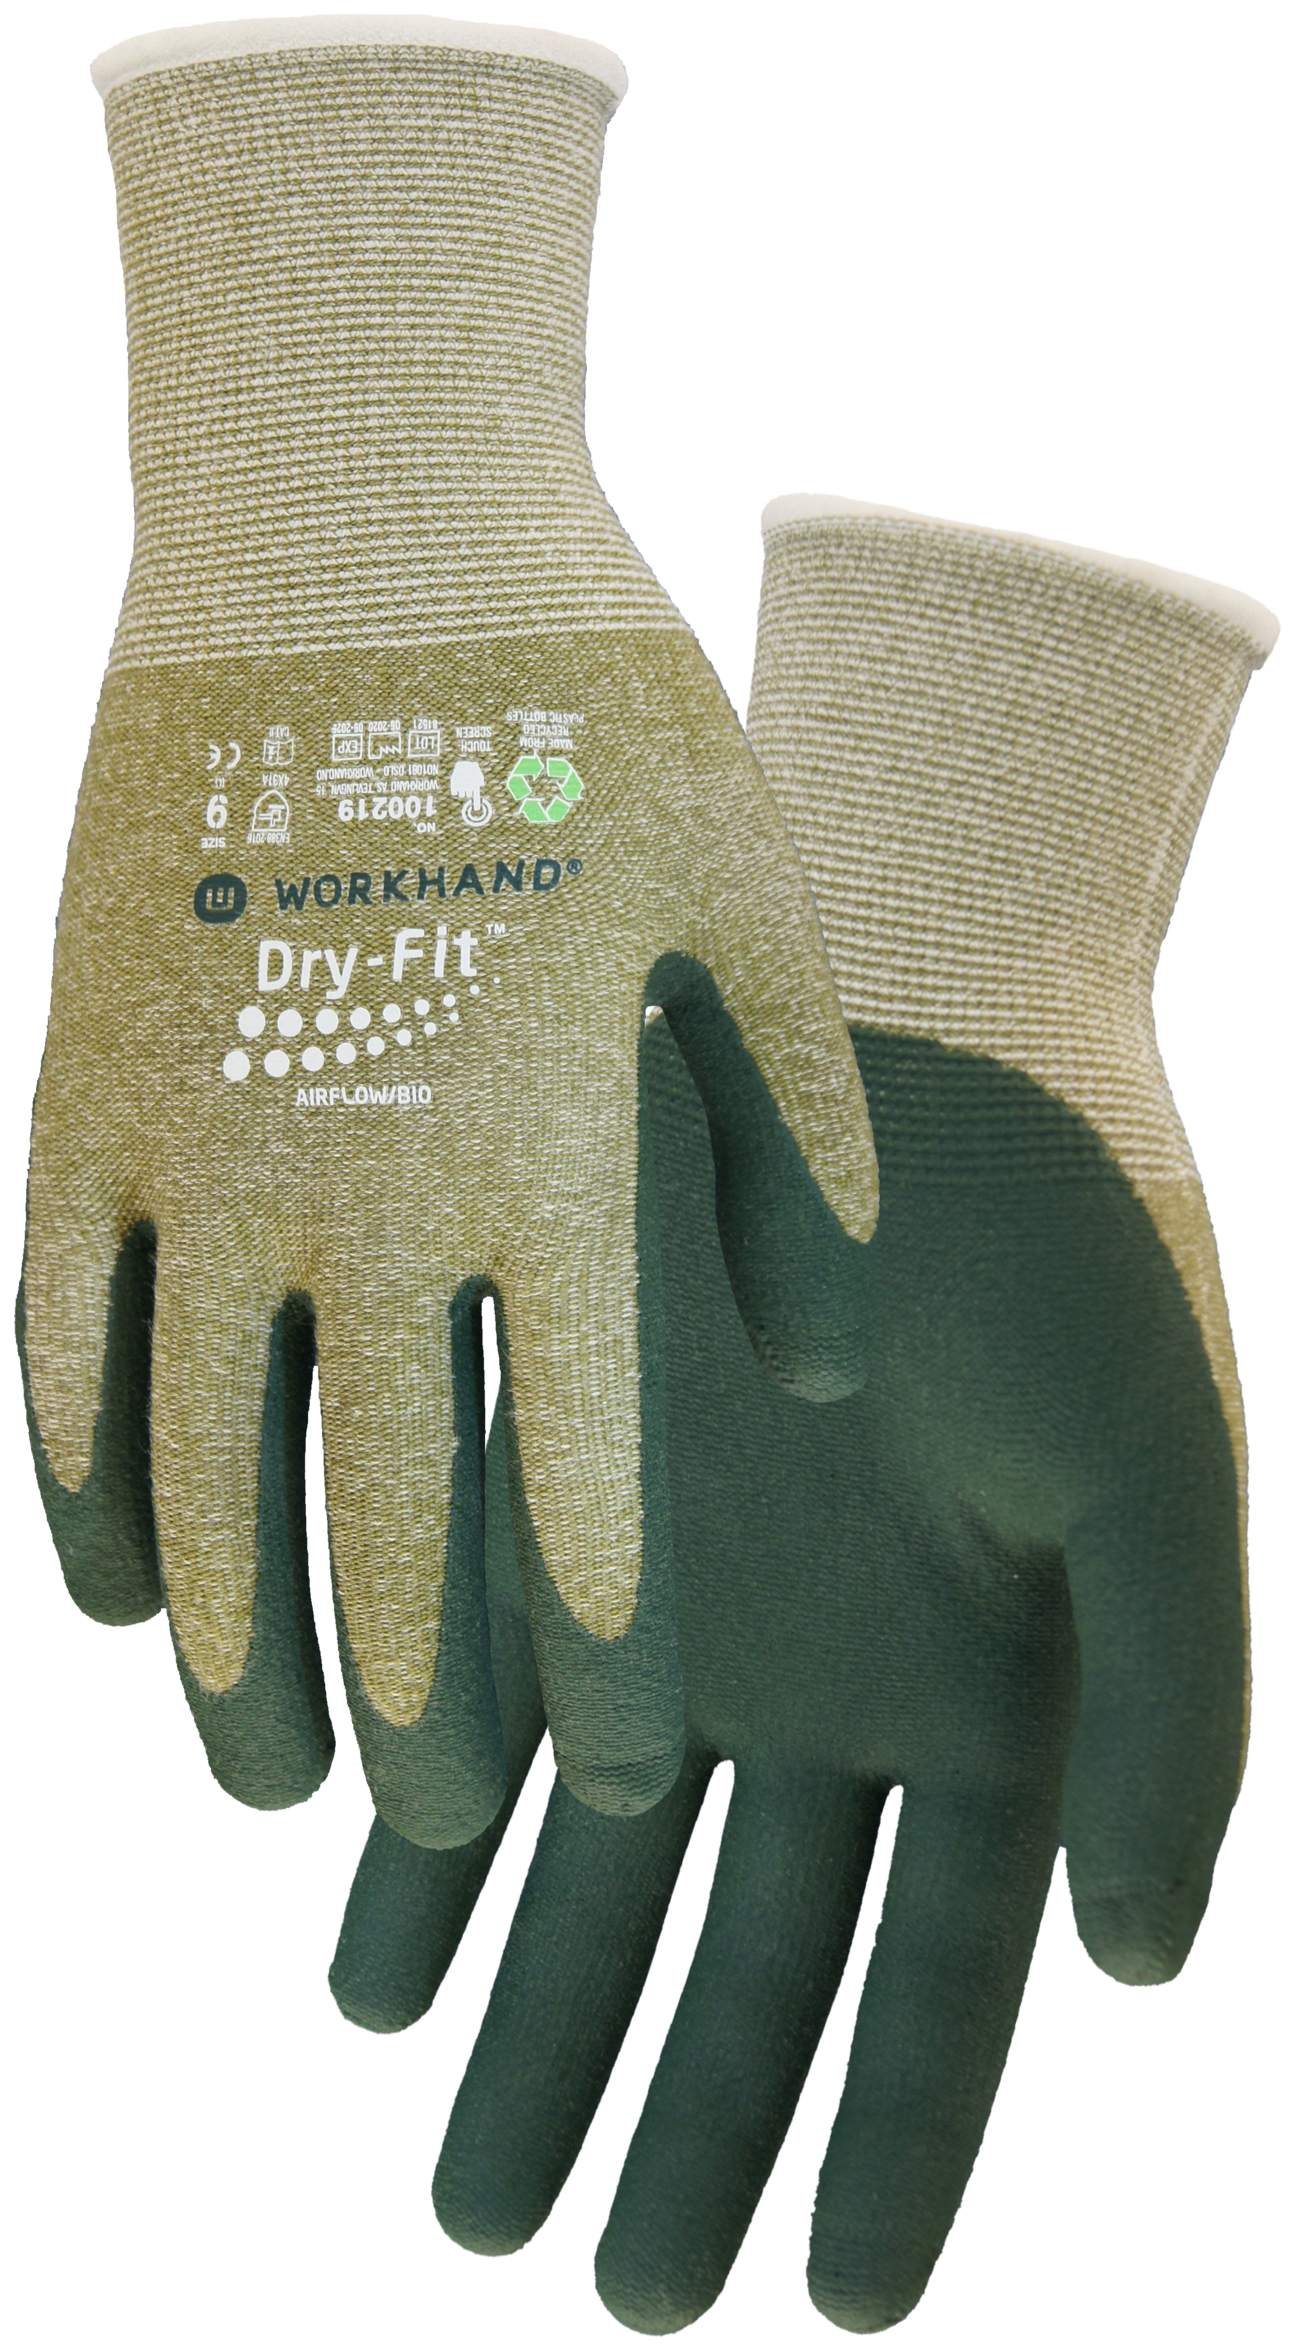 Workhand® Dry-Fit Airflow/BIO (608985)